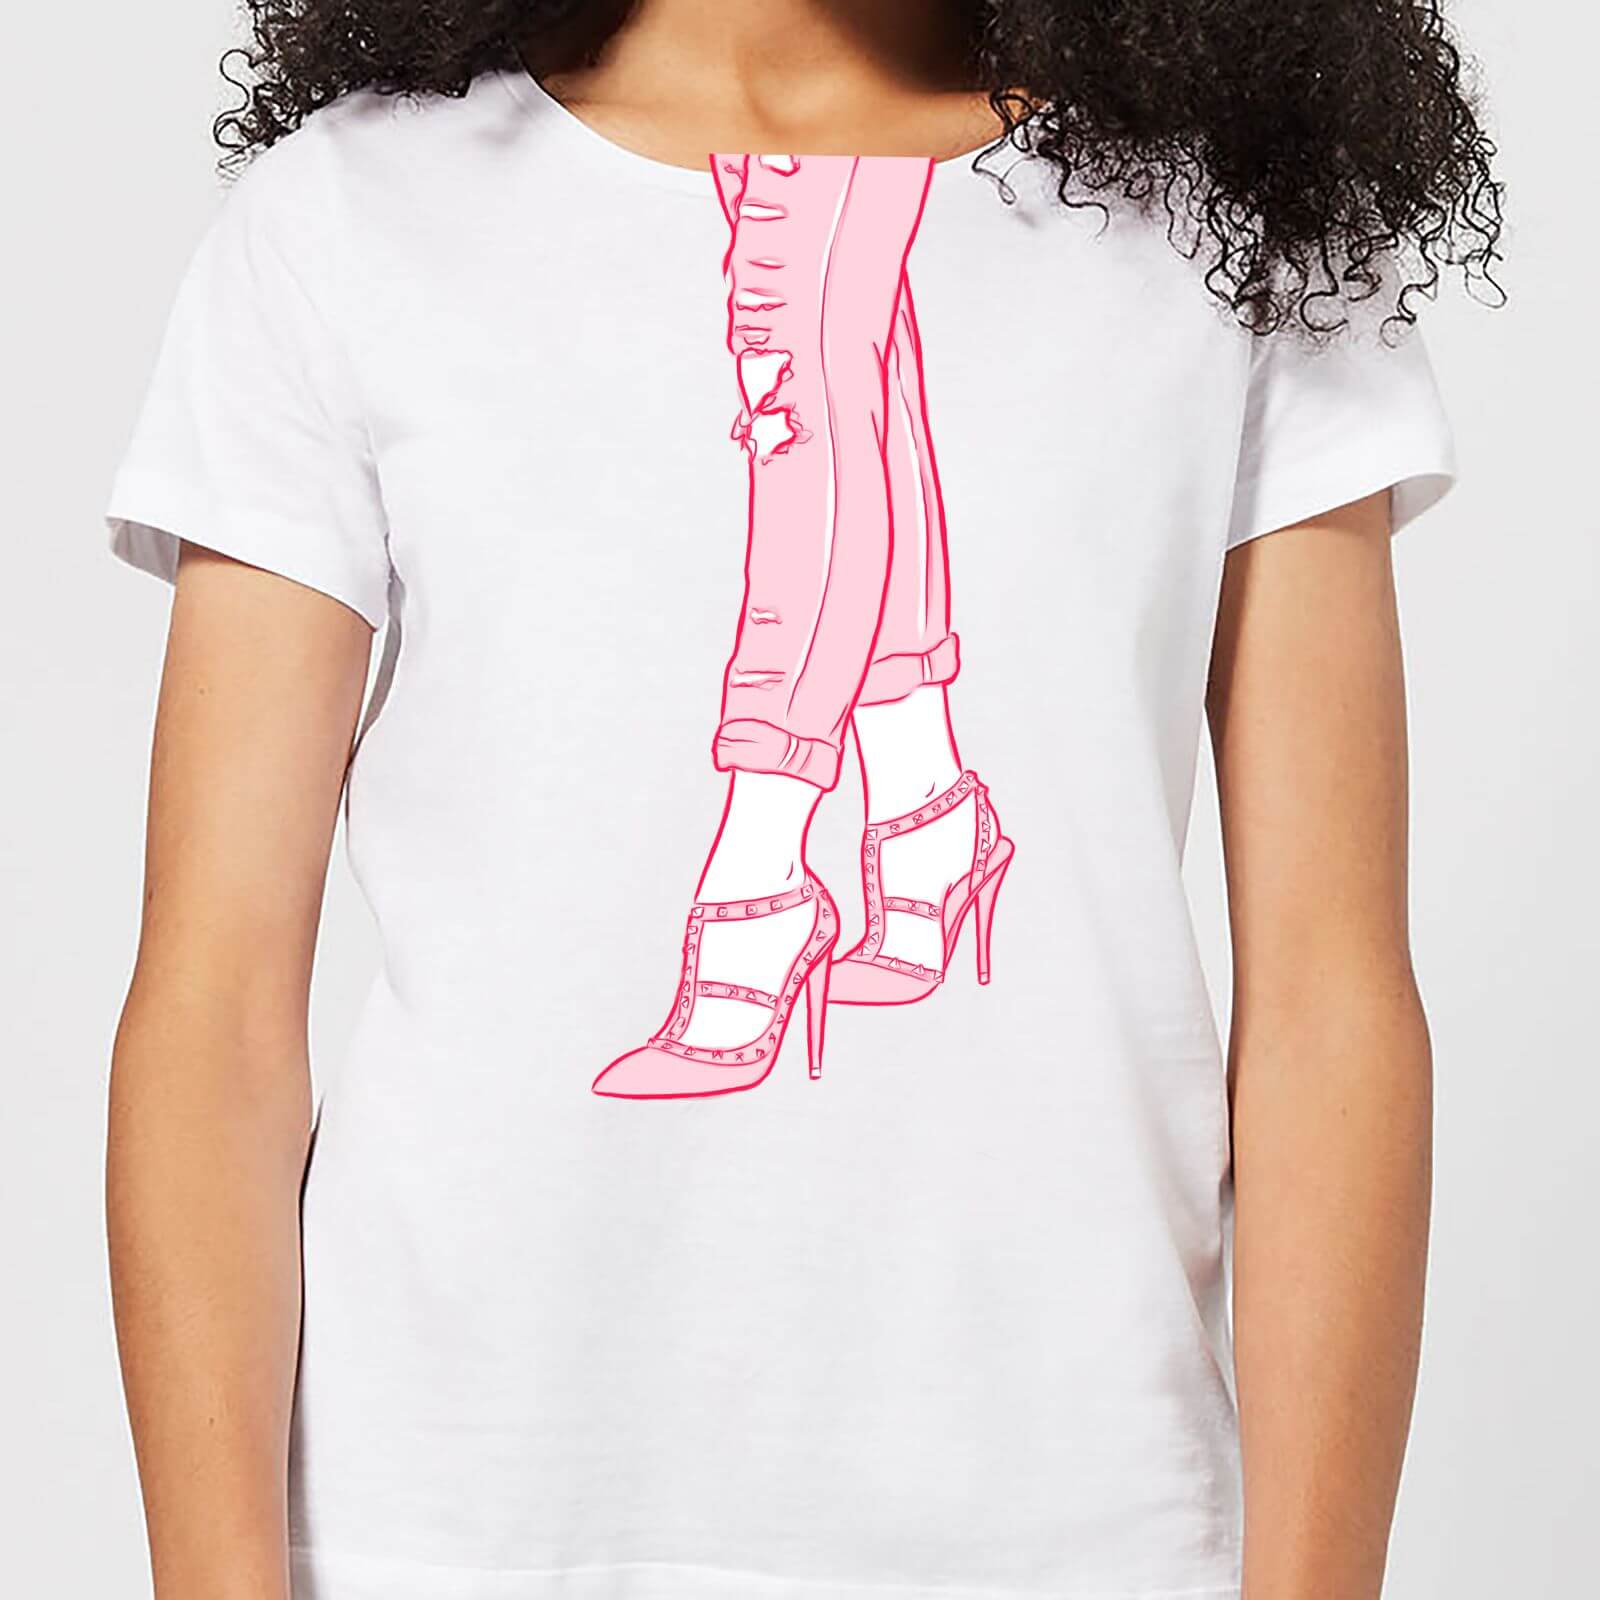 Heels And Jeans Women's T-Shirt - White - S - White